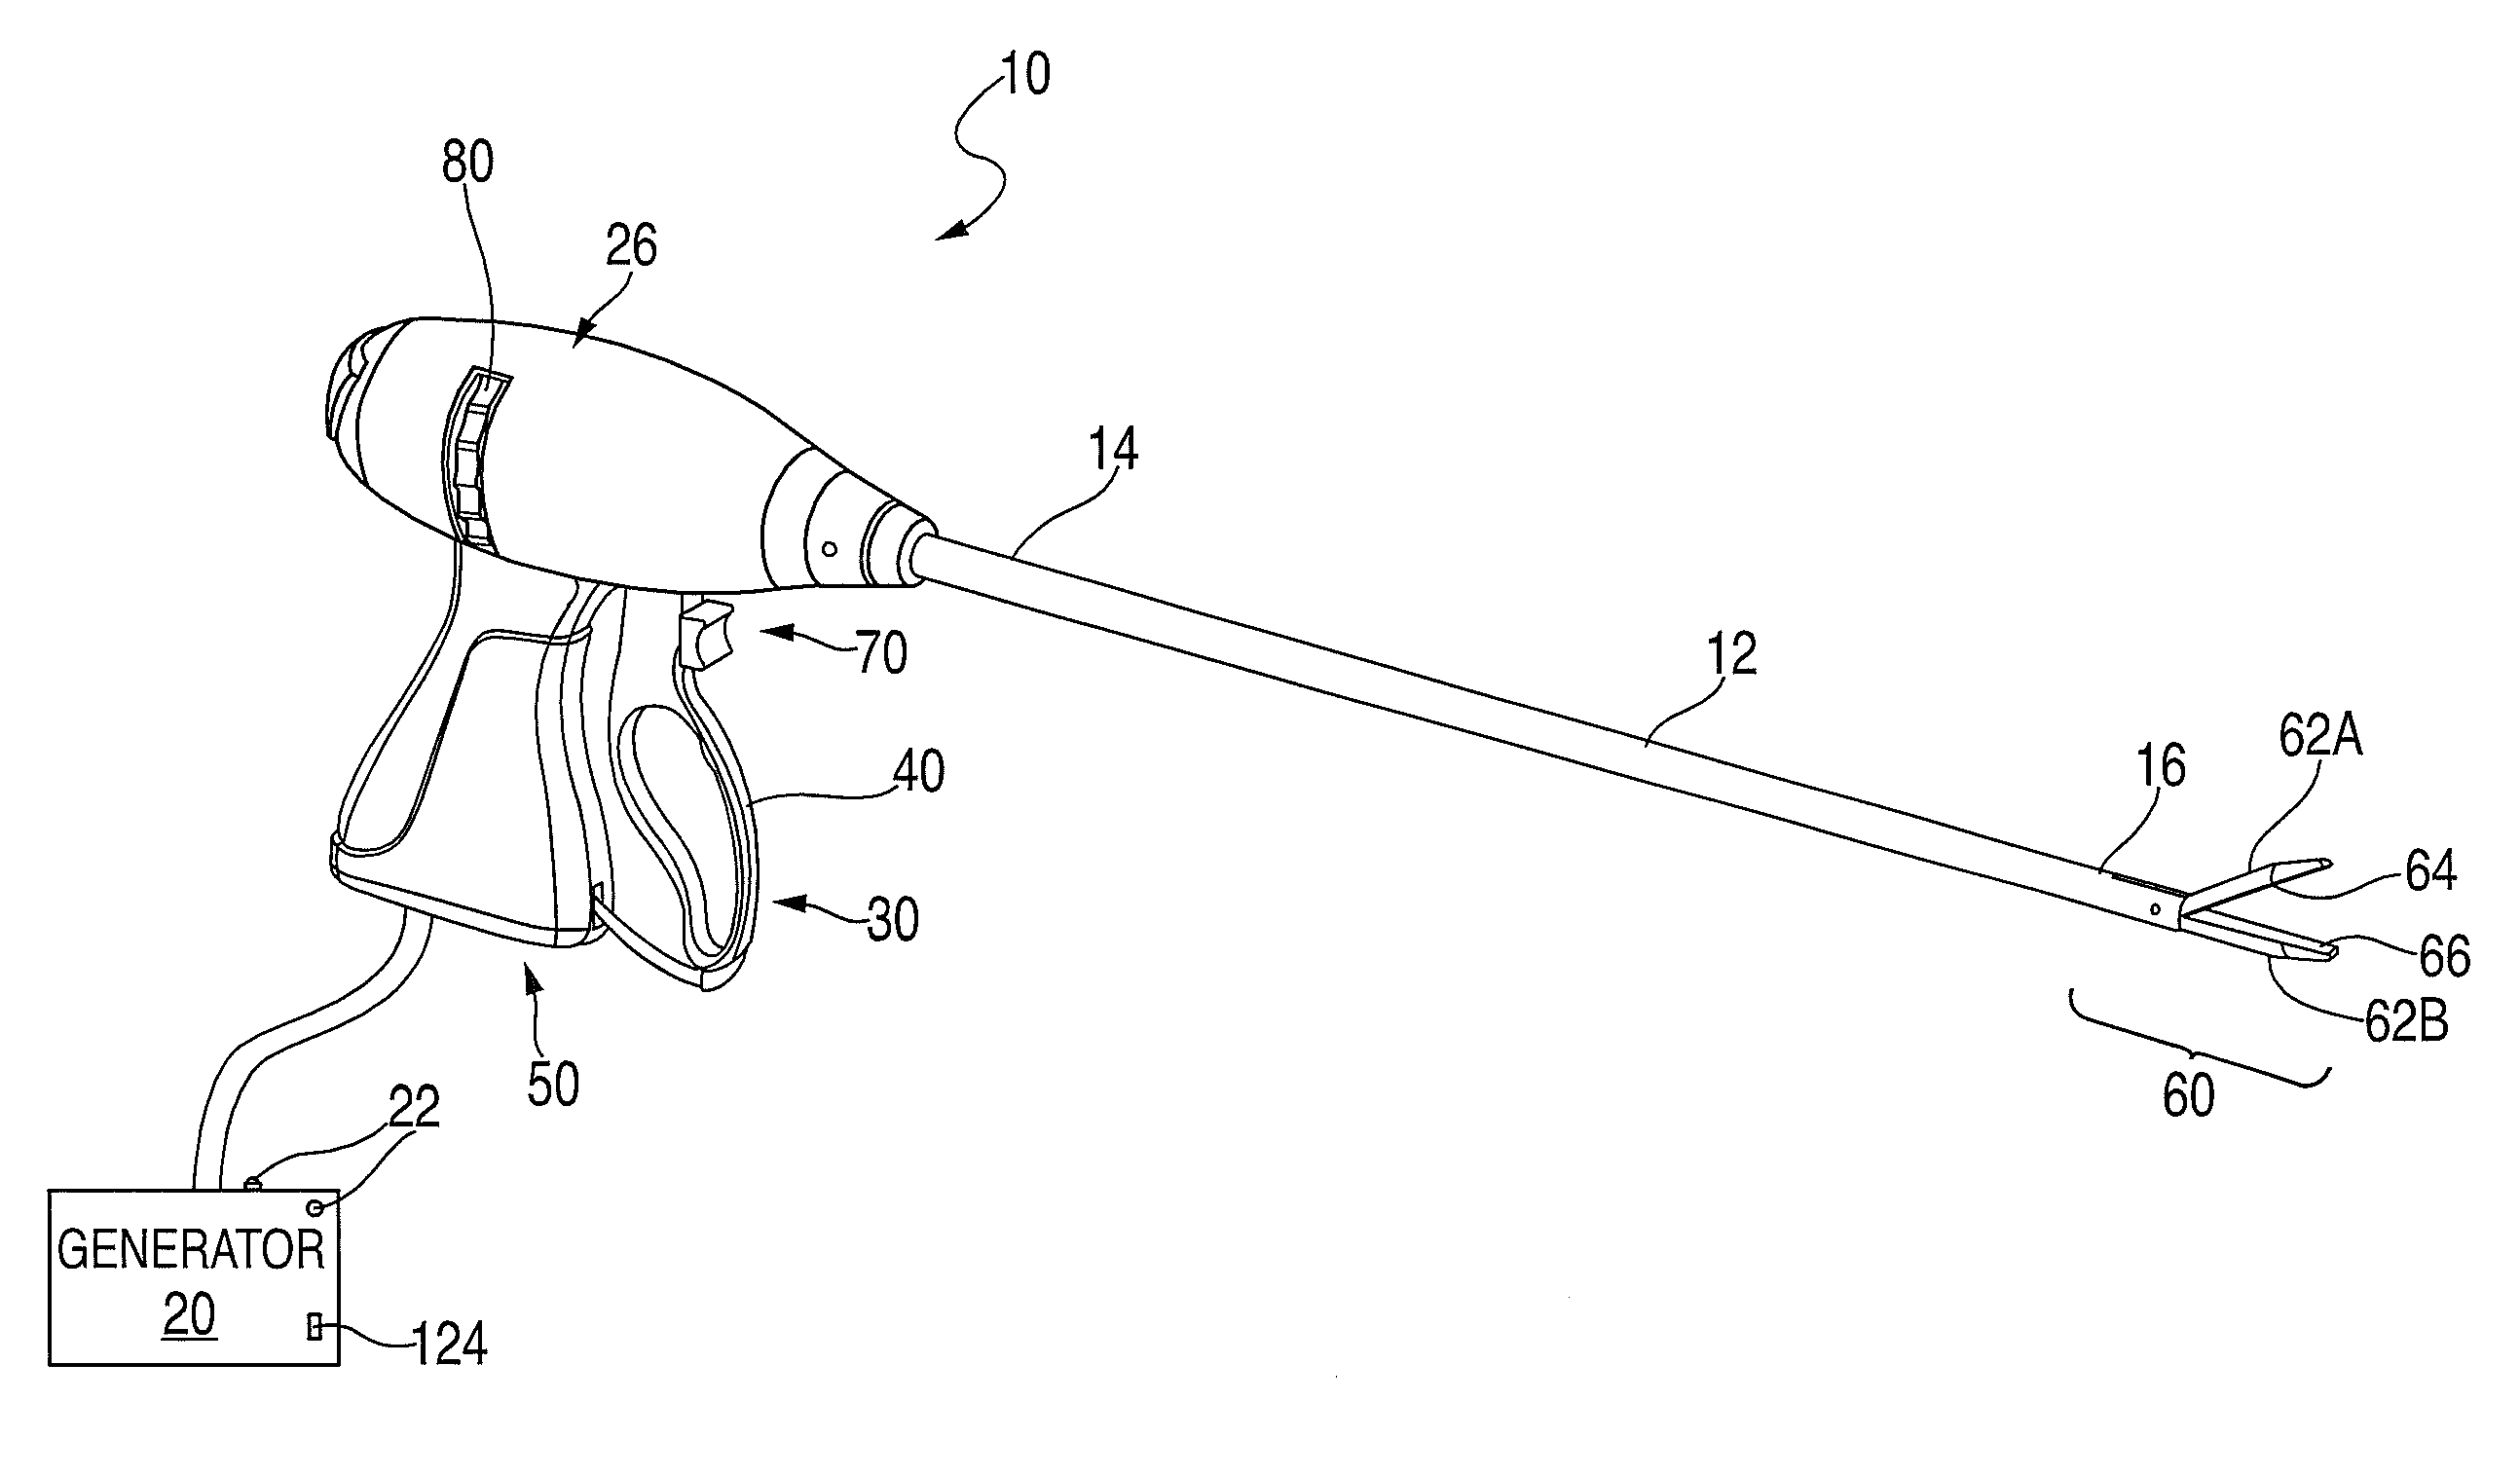 System and method for detecting critical structures using ultrasound